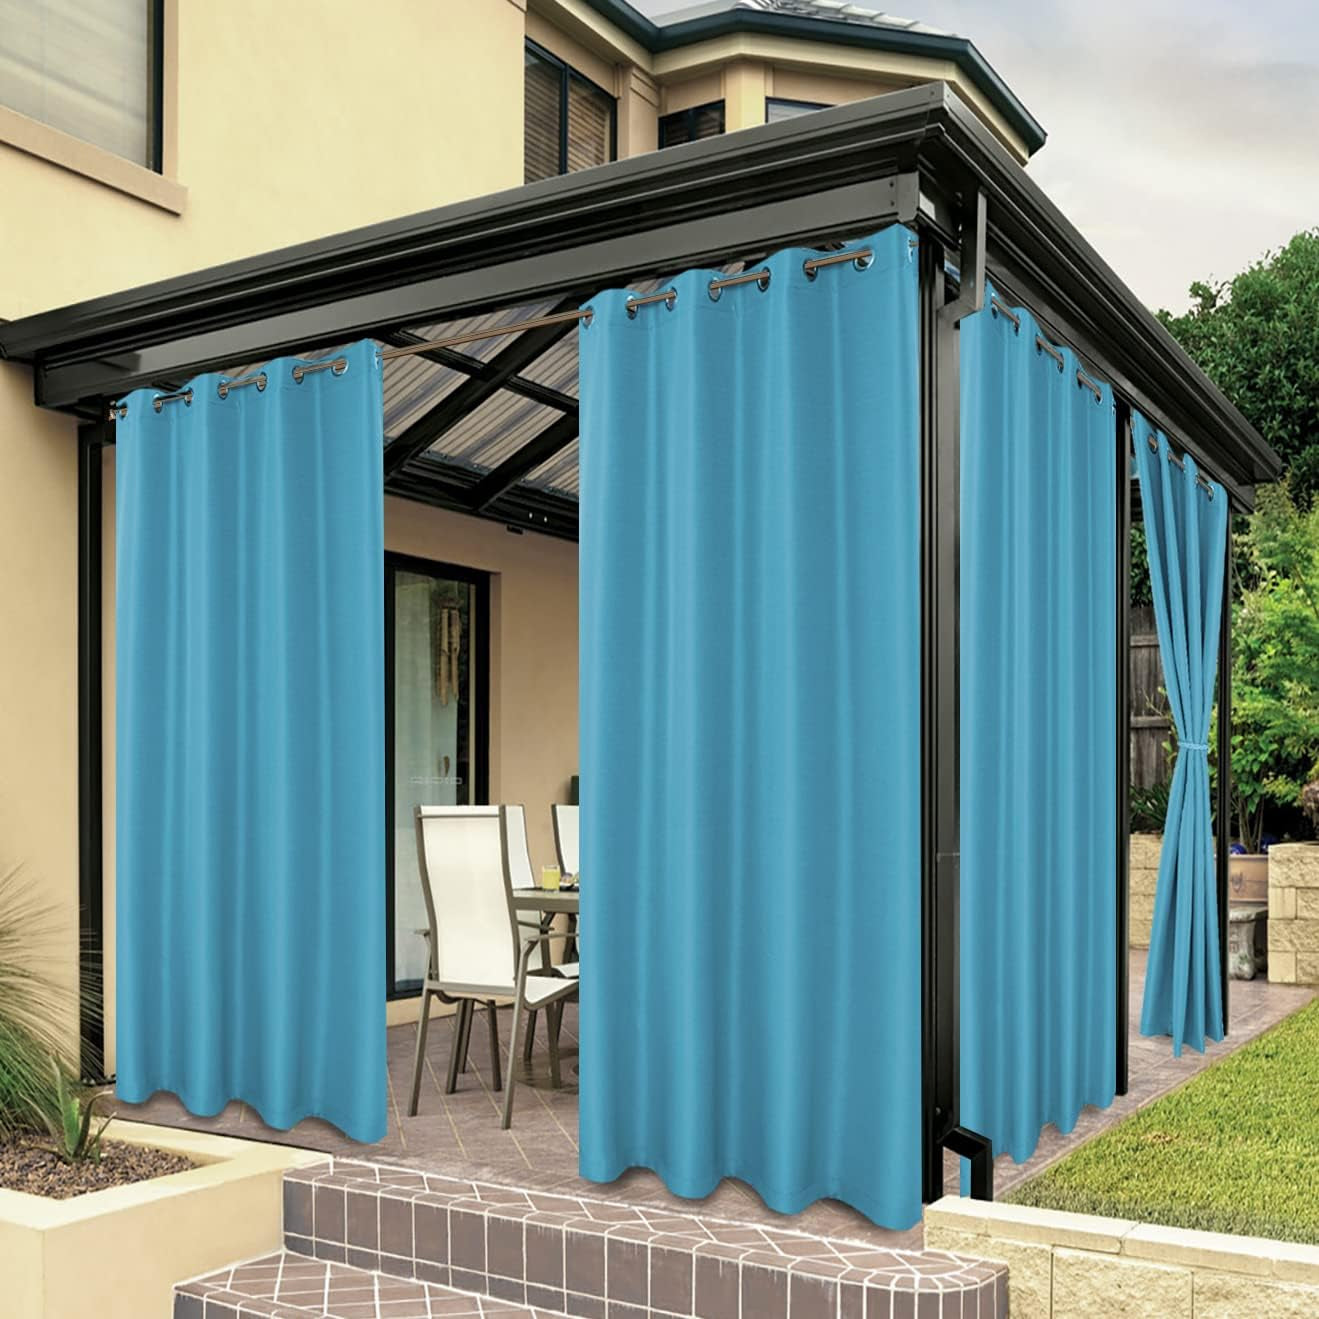 BONZER Outdoor Curtains for Patio Waterproof, Premium Thick Privacy Weatherproof Grommet outside Curtains for Porch, Gazebo, Deck, 1 Panel, 54W X 84L Inch, White  BONZER Teal 84W X 84L Inch 